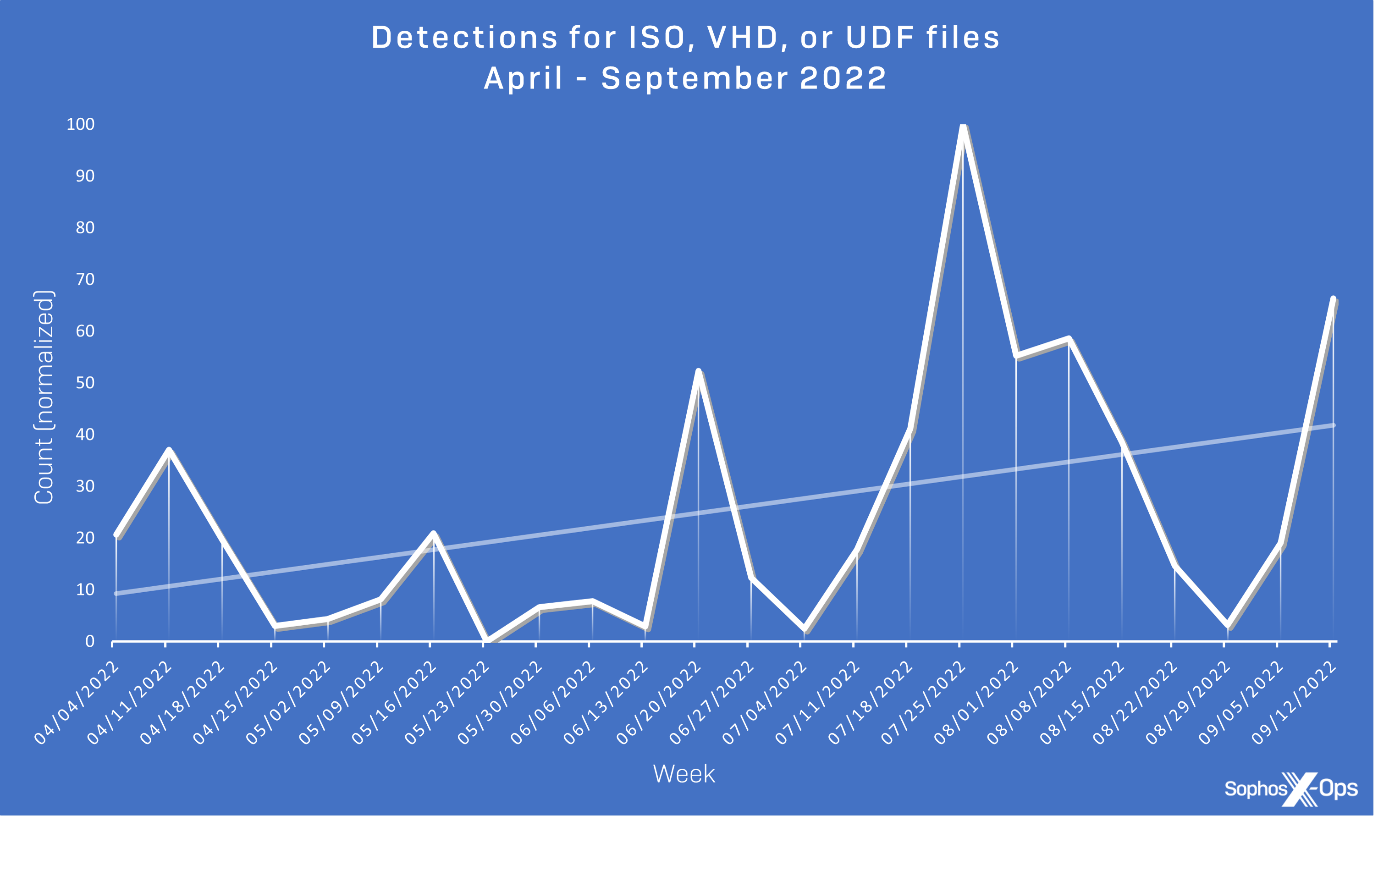 A line graph showing detections for disk image filetypes